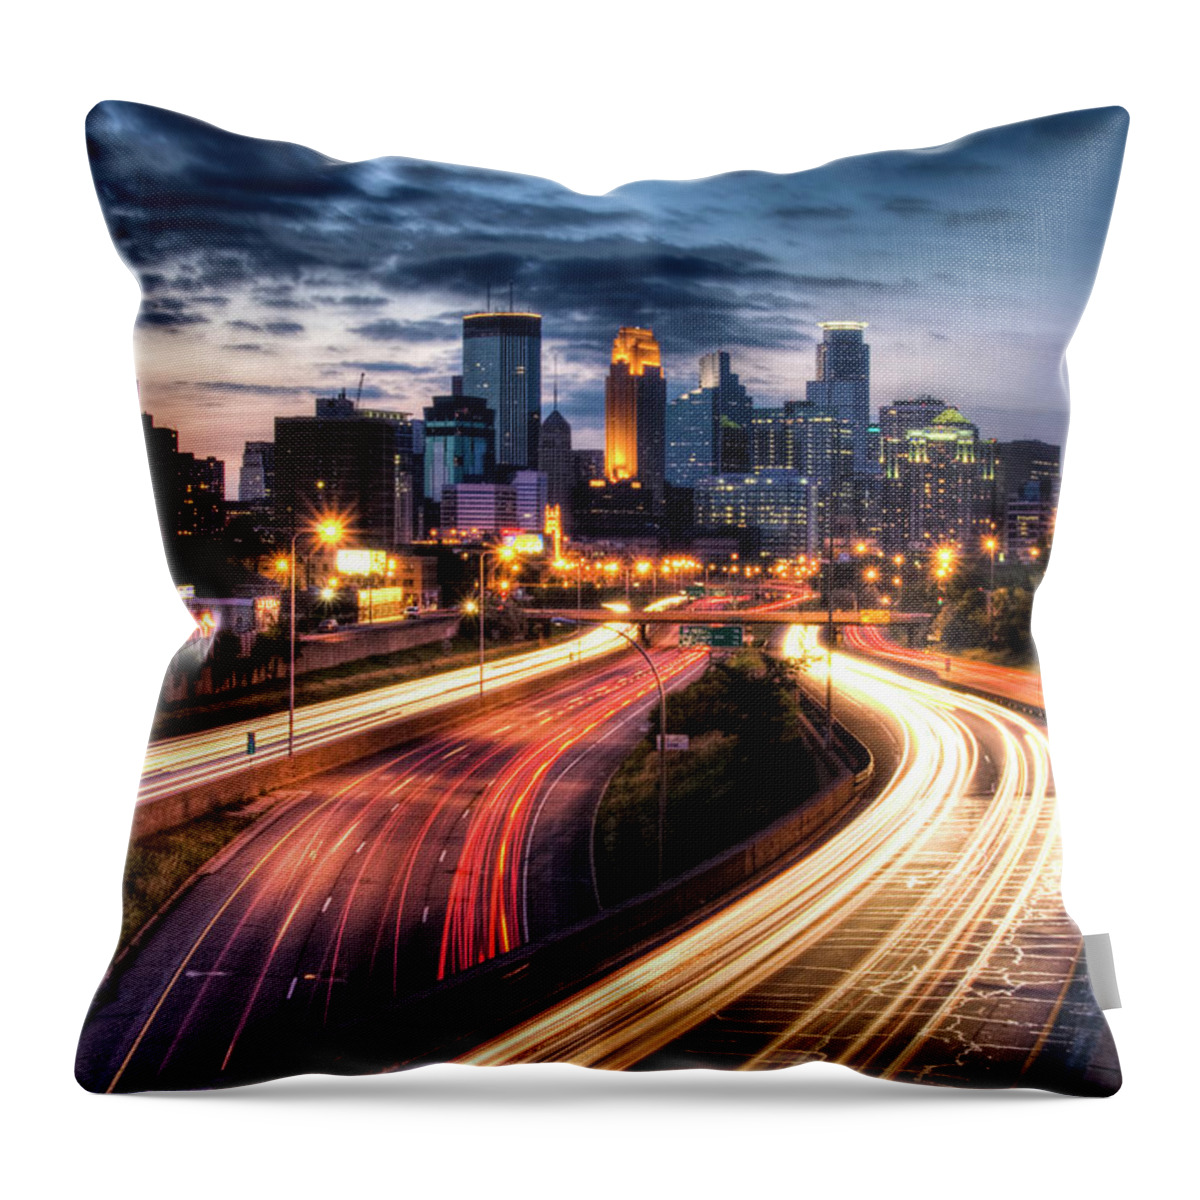 Downtown District Throw Pillow featuring the photograph Downtown Minneapolis Skyscrapers by Greg Benz